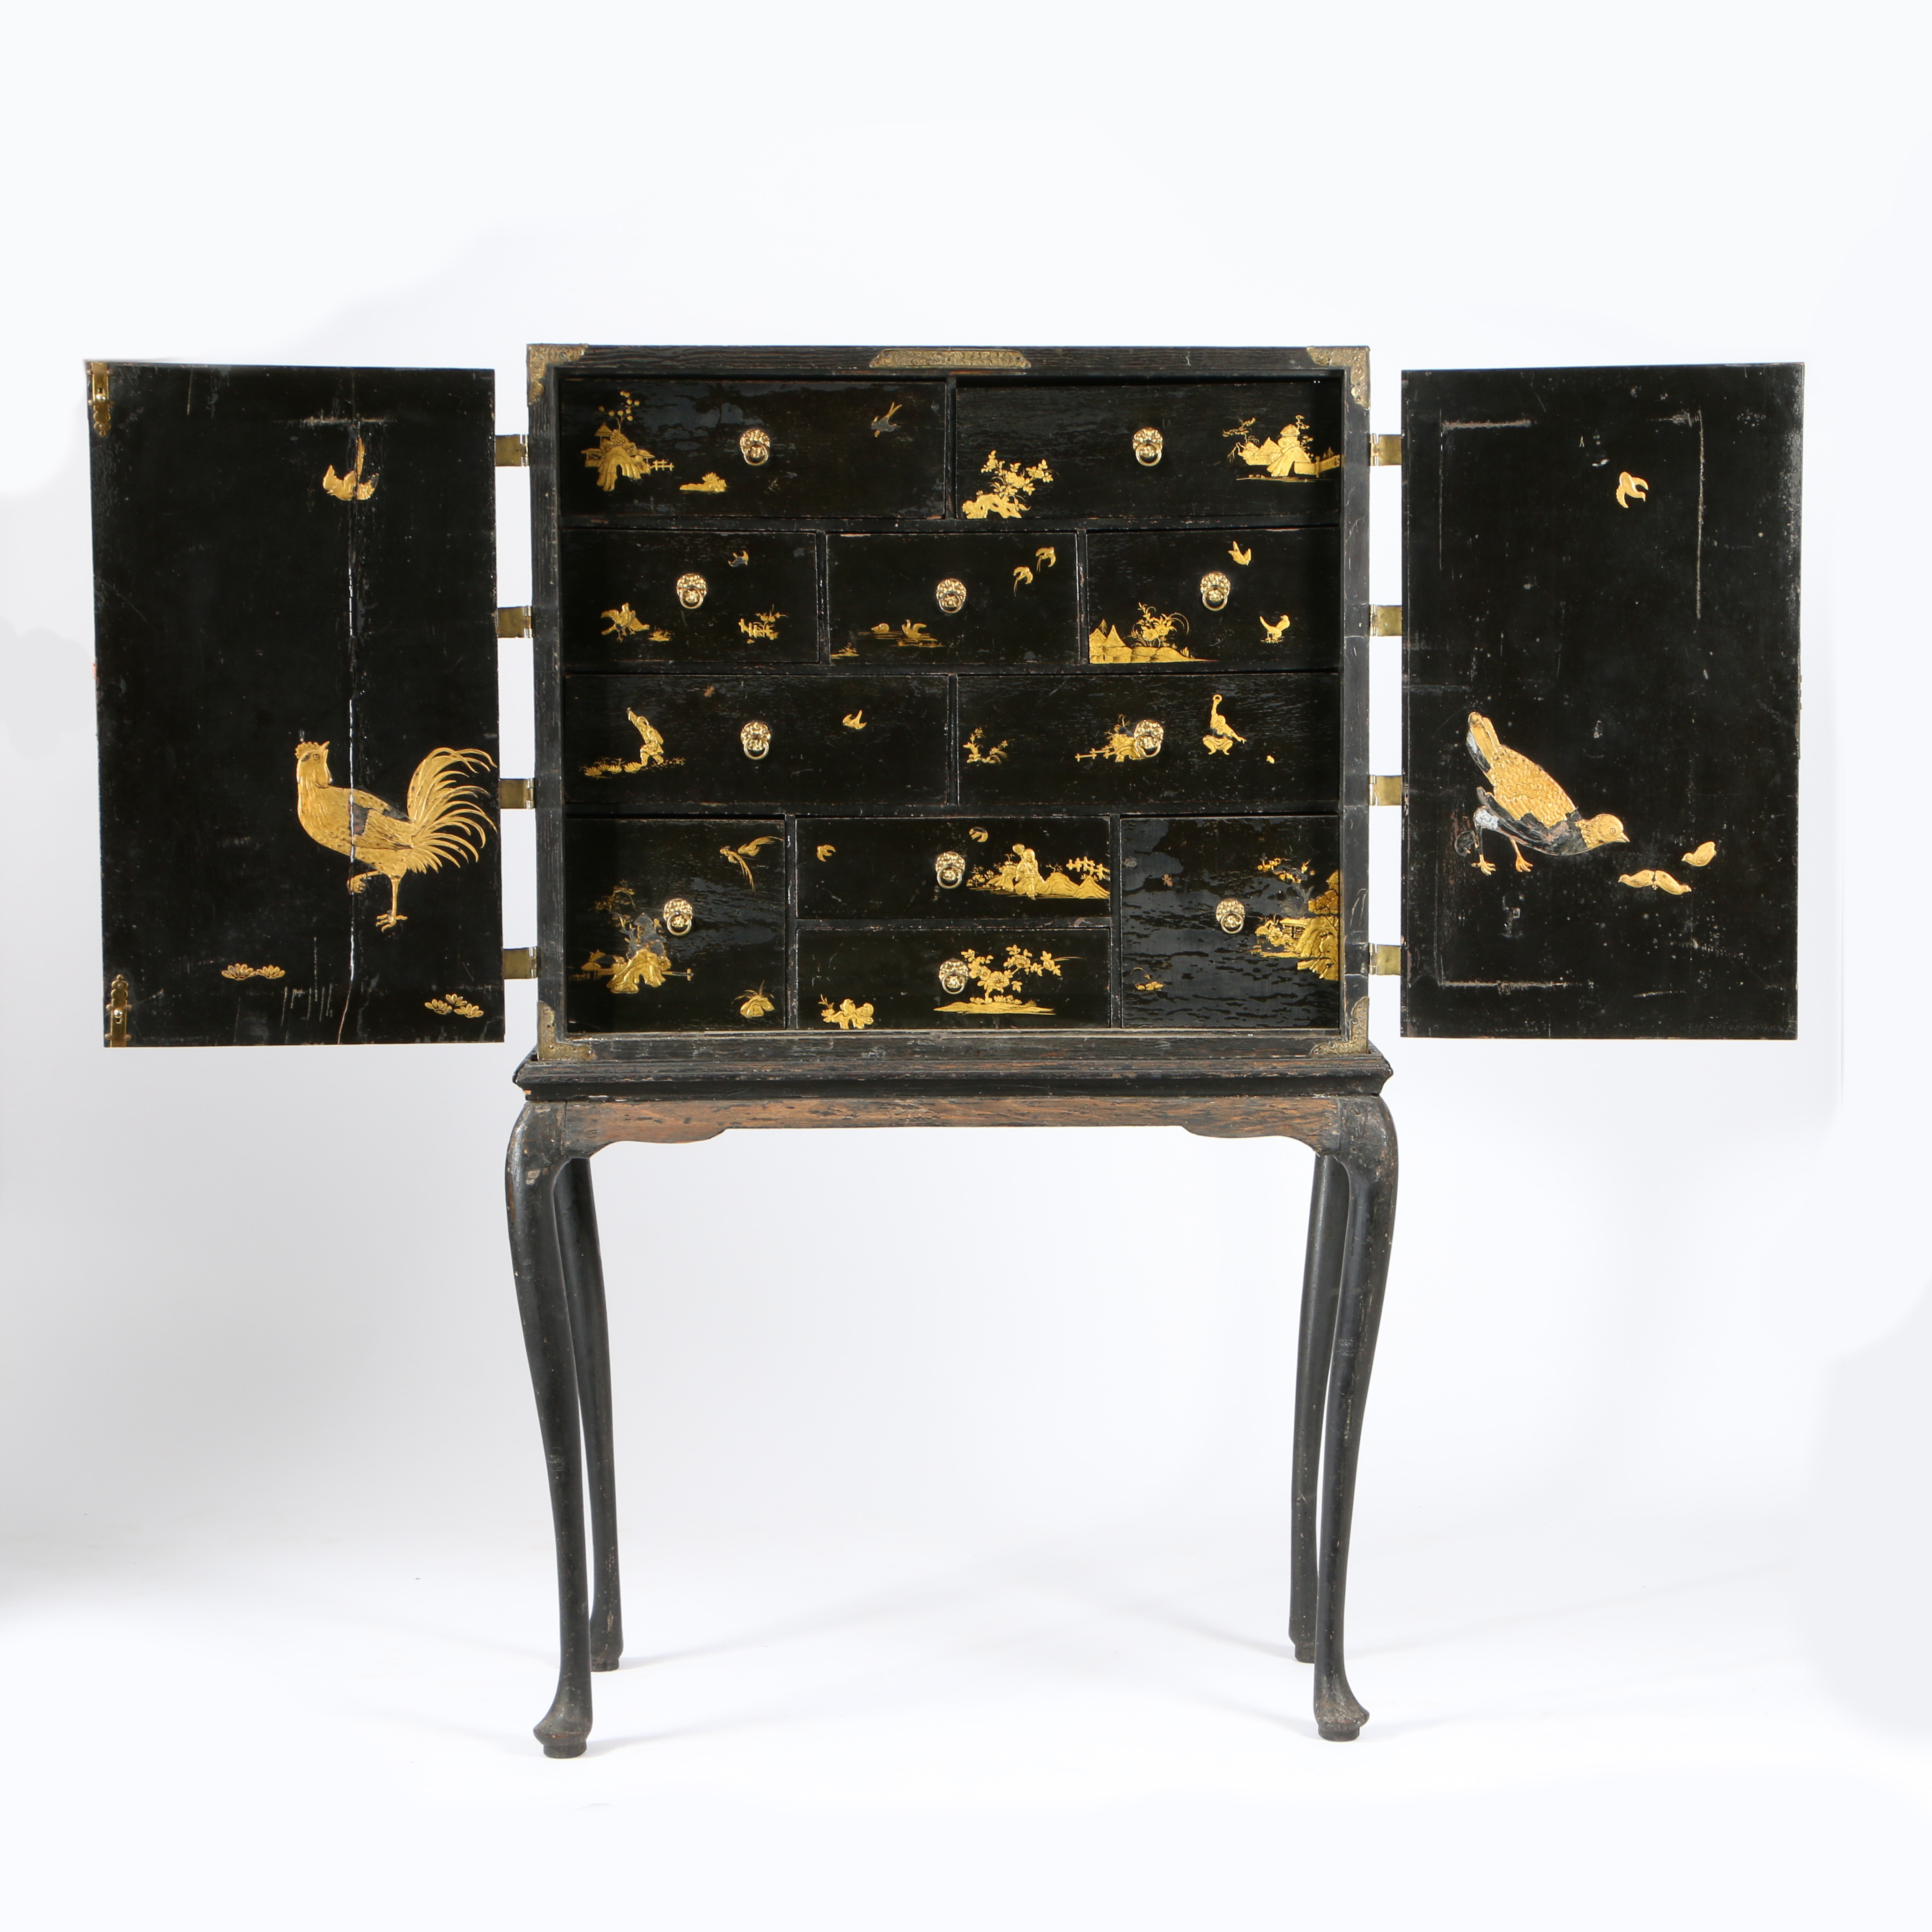 AN EARLY 18TH CENTURY JAPANESE EXPORT BLACK LACQUERED CABINET-ON-STAND, CIRCA 1720. - Image 2 of 4